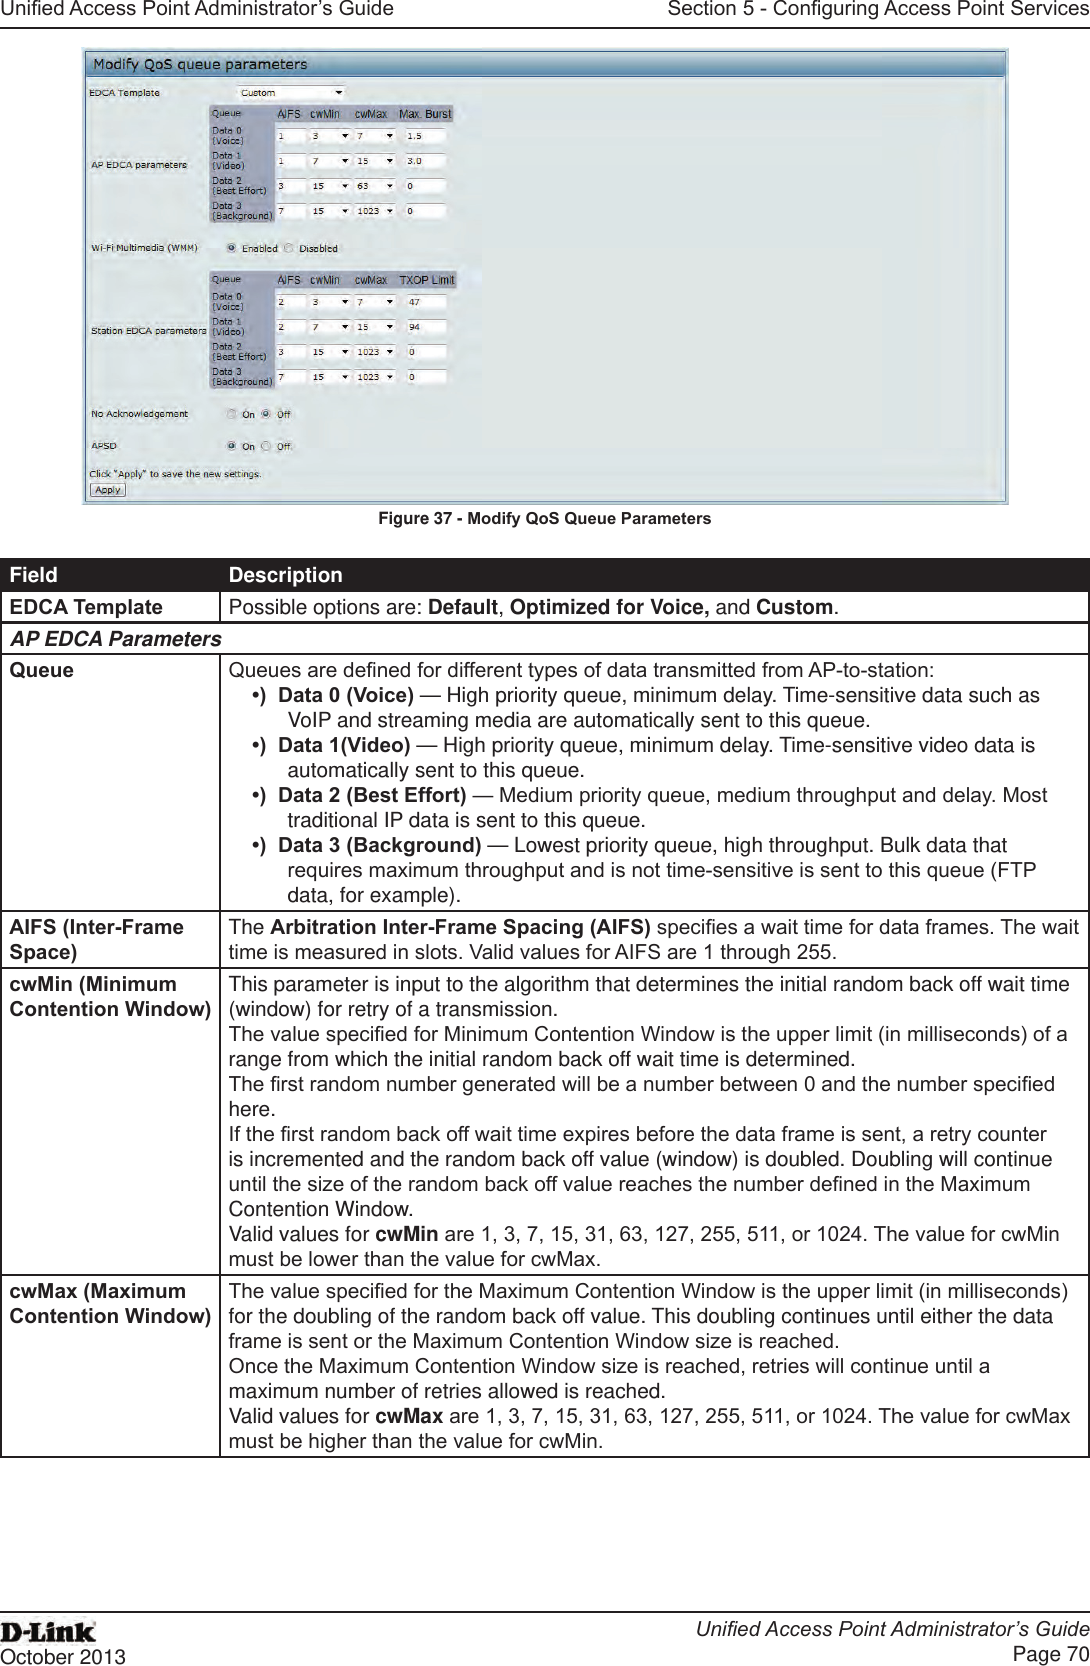 Unied Access Point Administrator’s GuideUnied Access Point Administrator’s GuidePage 70October 2013Section 5 - Conguring Access Point ServicesFigure 37 - Modify QoS Queue ParametersField DescriptionEDCA Template Possible options are: Default, Optimized for Voice, and Custom.AP EDCA ParametersQueue Queues are dened for different types of data transmitted from AP-to-station:•)  Data 0 (Voice) — High priority queue, minimum delay. Time-sensitive data such as VoIP and streaming media are automatically sent to this queue.•)  Data 1(Video) — High priority queue, minimum delay. Time-sensitive video data is automatically sent to this queue.•)  Data 2 (Best Effort) — Medium priority queue, medium throughput and delay. Most traditional IP data is sent to this queue.•)  Data 3 (Background) — Lowest priority queue, high throughput. Bulk data that requires maximum throughput and is not time-sensitive is sent to this queue (FTP data, for example).AIFS (Inter-Frame Space)The Arbitration Inter-Frame Spacing (AIFS) species a wait time for data frames. The wait time is measured in slots. Valid values for AIFS are 1 through 255.cwMin (Minimum Contention Window)This parameter is input to the algorithm that determines the initial random back off wait time (window) for retry of a transmission. The value specied for Minimum Contention Window is the upper limit (in milliseconds) of a range from which the initial random back off wait time is determined.The rst random number generated will be a number between 0 and the number specied here.If the rst random back off wait time expires before the data frame is sent, a retry counter is incremented and the random back off value (window) is doubled. Doubling will continue until the size of the random back off value reaches the number dened in the Maximum Contention Window.Valid values for cwMin are 1, 3, 7, 15, 31, 63, 127, 255, 511, or 1024. The value for cwMin must be lower than the value for cwMax.cwMax (Maximum Contention Window)The value specied for the Maximum Contention Window is the upper limit (in milliseconds) for the doubling of the random back off value. This doubling continues until either the data frame is sent or the Maximum Contention Window size is reached.Once the Maximum Contention Window size is reached, retries will continue until a maximum number of retries allowed is reached.Valid values for cwMax are 1, 3, 7, 15, 31, 63, 127, 255, 511, or 1024. The value for cwMax must be higher than the value for cwMin.